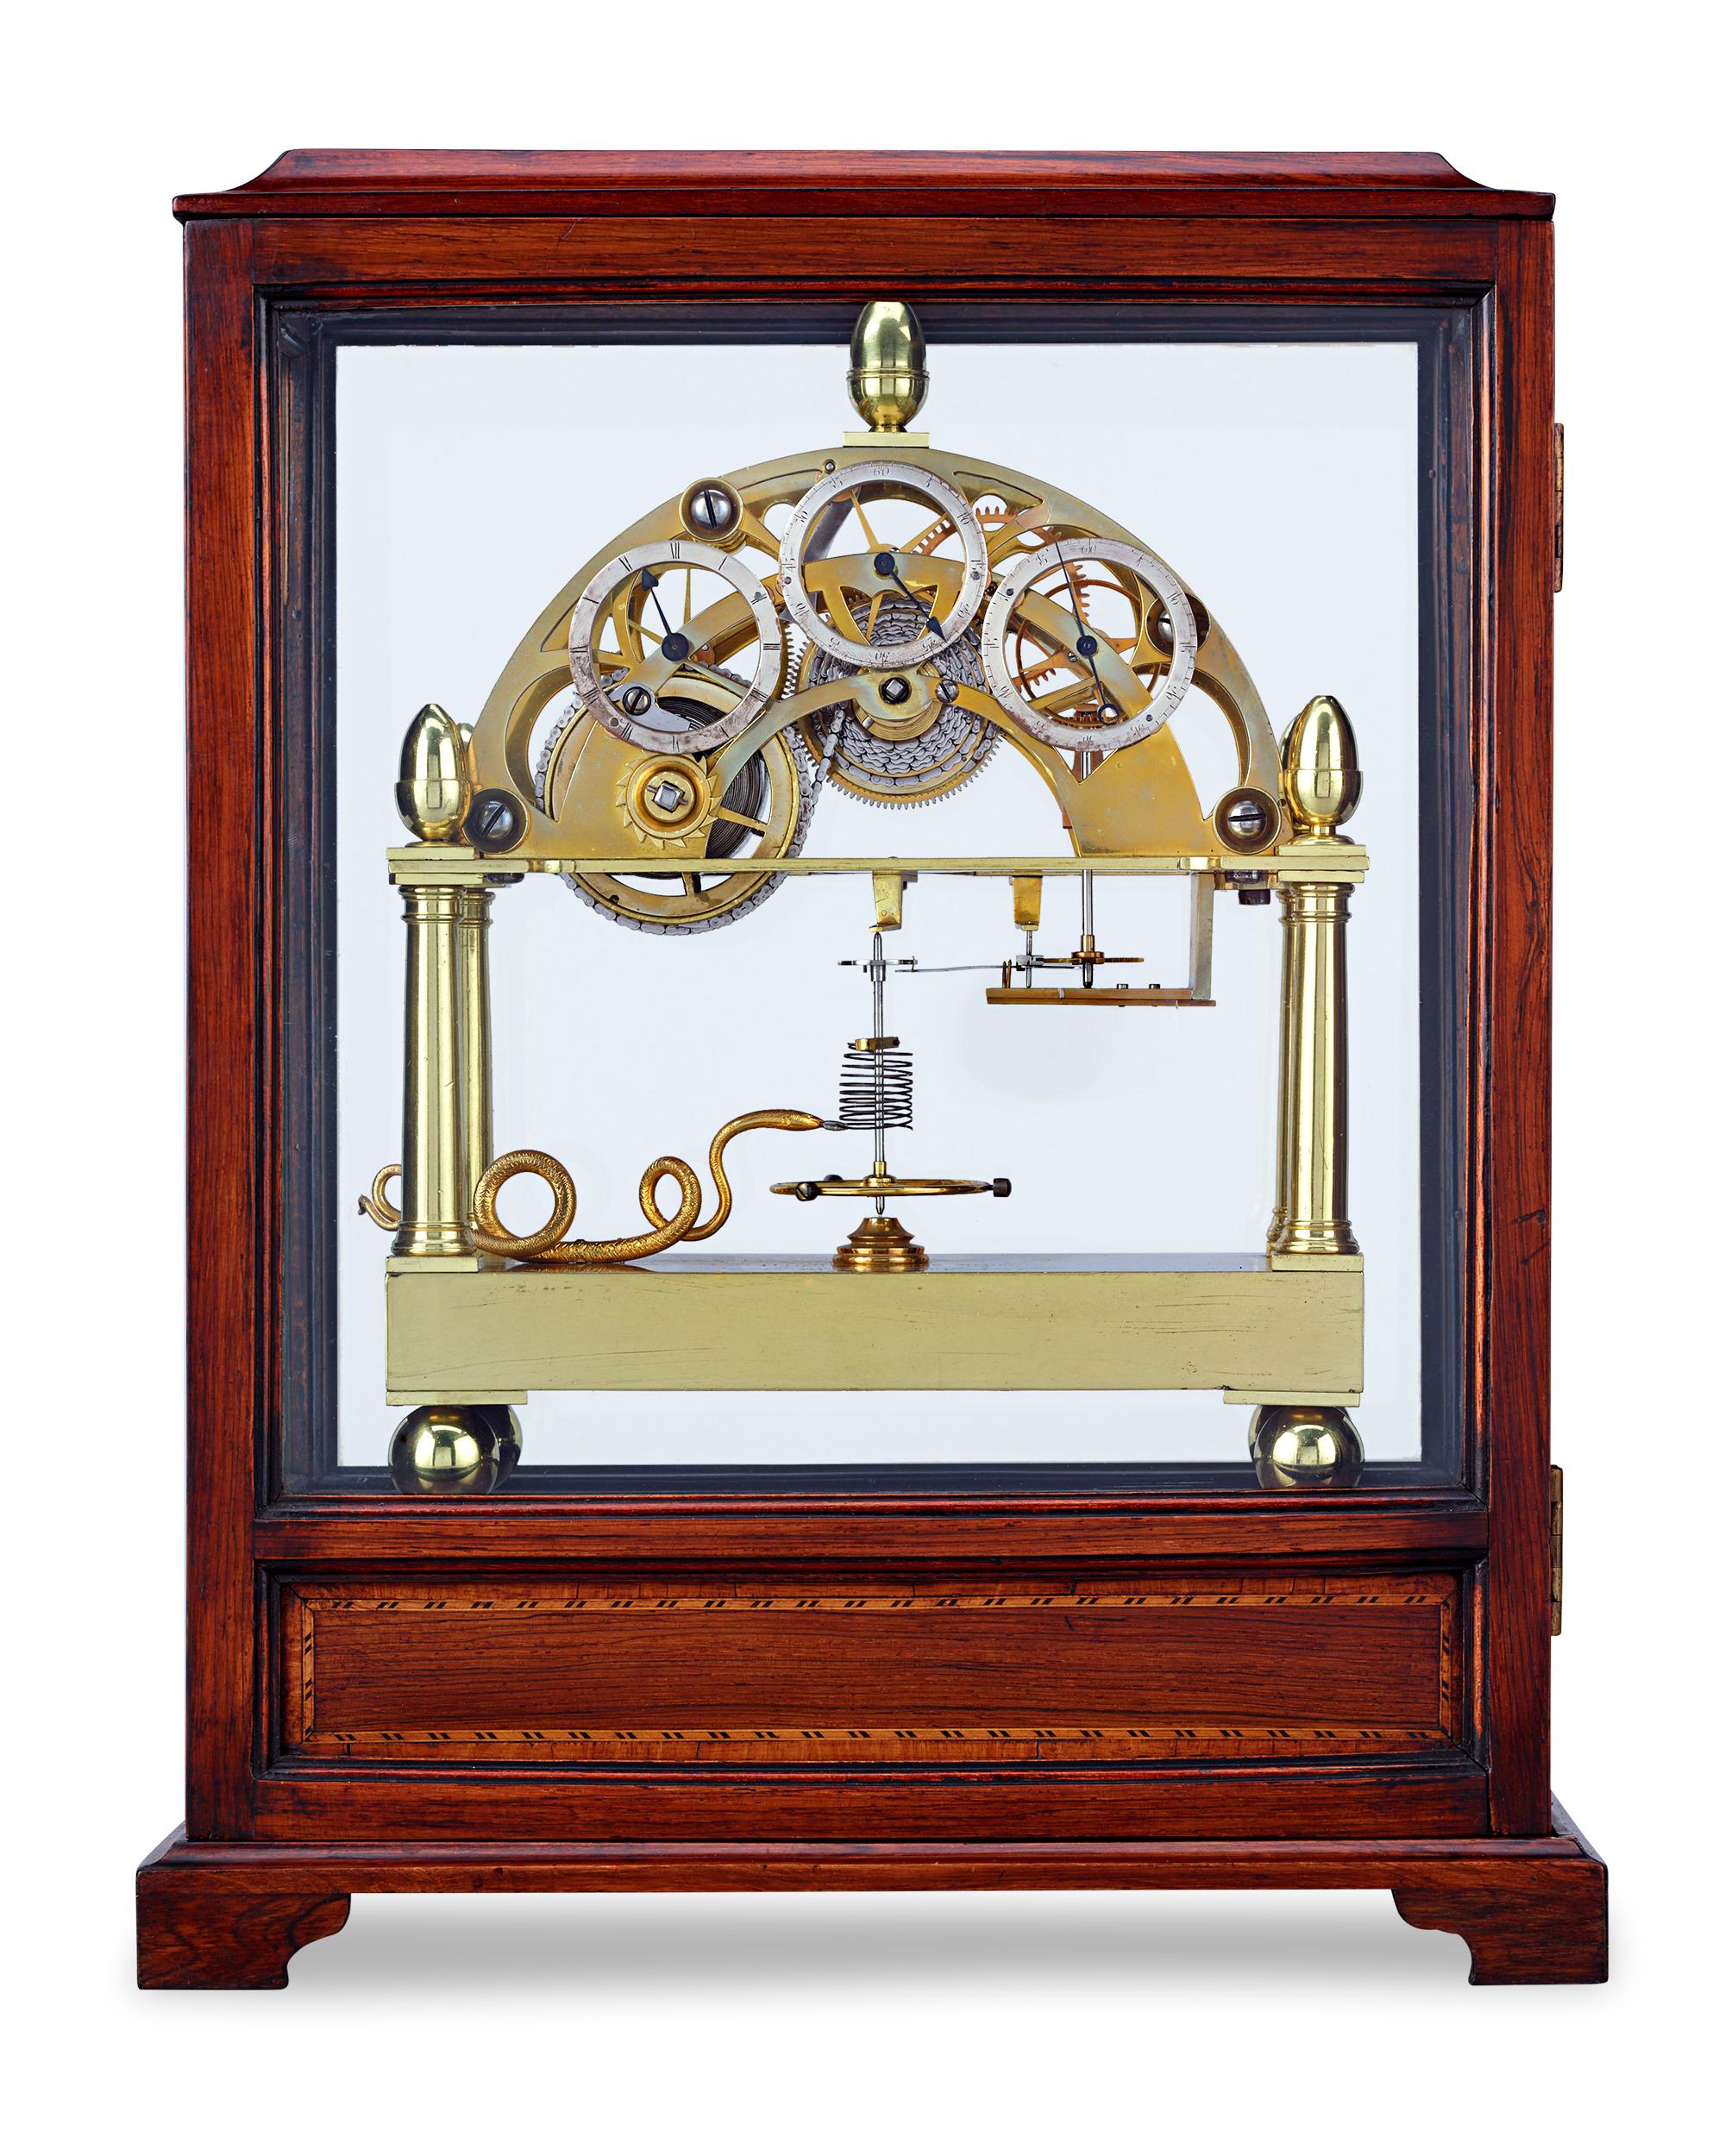 A horologic masterpiece of precision and beauty, this Victorian-era skeleton clock is an extraordinary example of 19th-century British clockmaking by the famed James Condliff of Liverpool. Regarded as the father of the English skeleton clock,